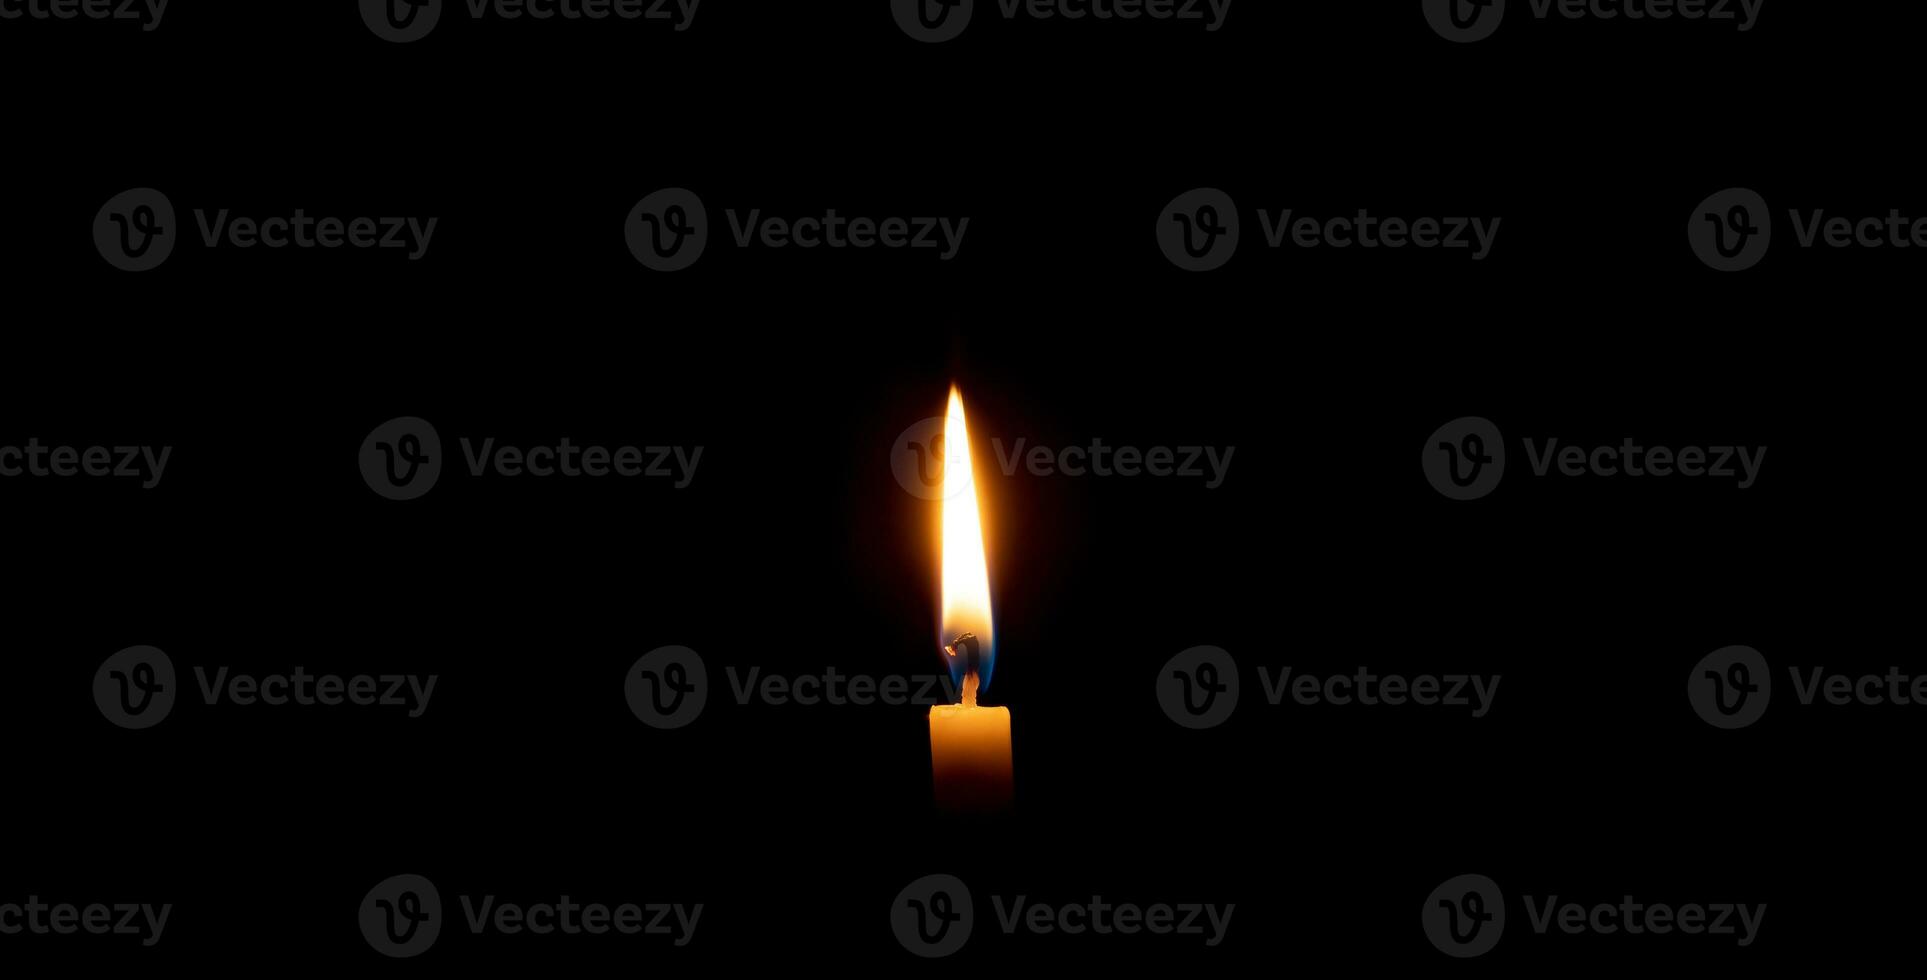 A single burning candle flame or light glowing on an orange candle on black or dark background on table in church for Christmas, funeral or memorial service with copy space photo